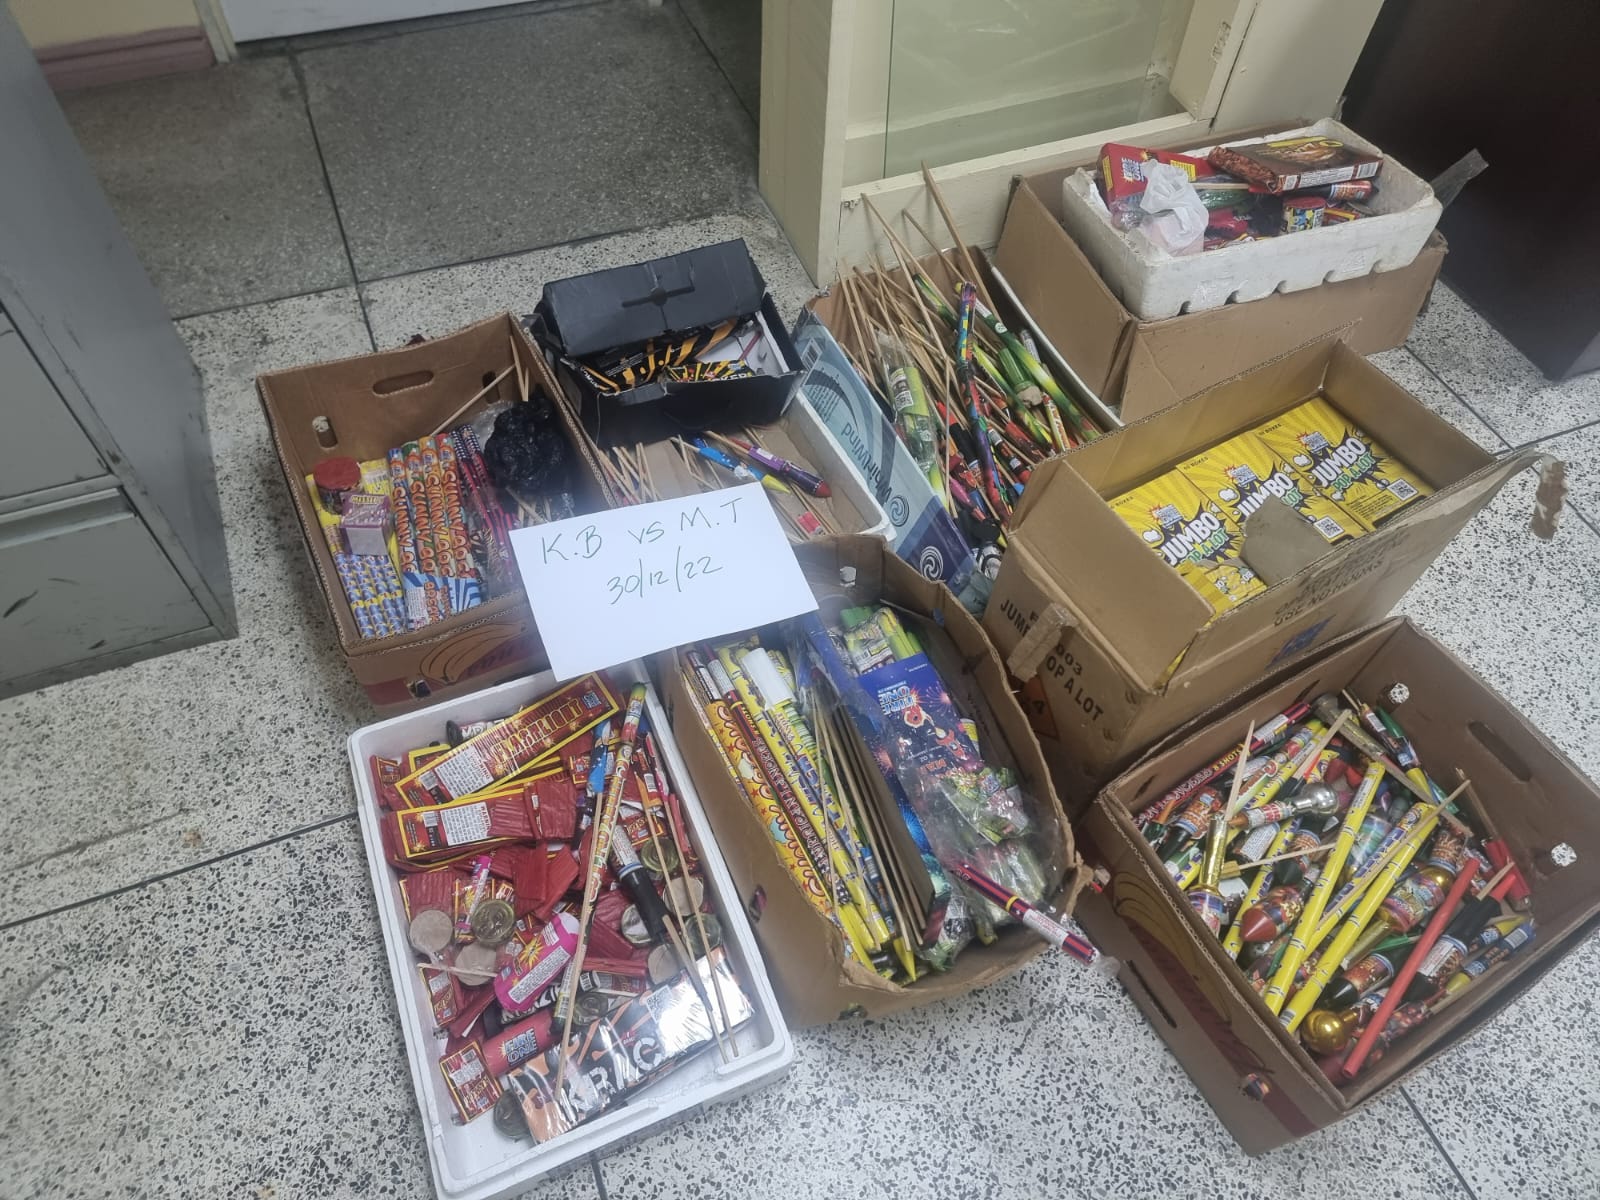 Cops dismantle gang in Tunapuna and seize illegal fireworks in PoS